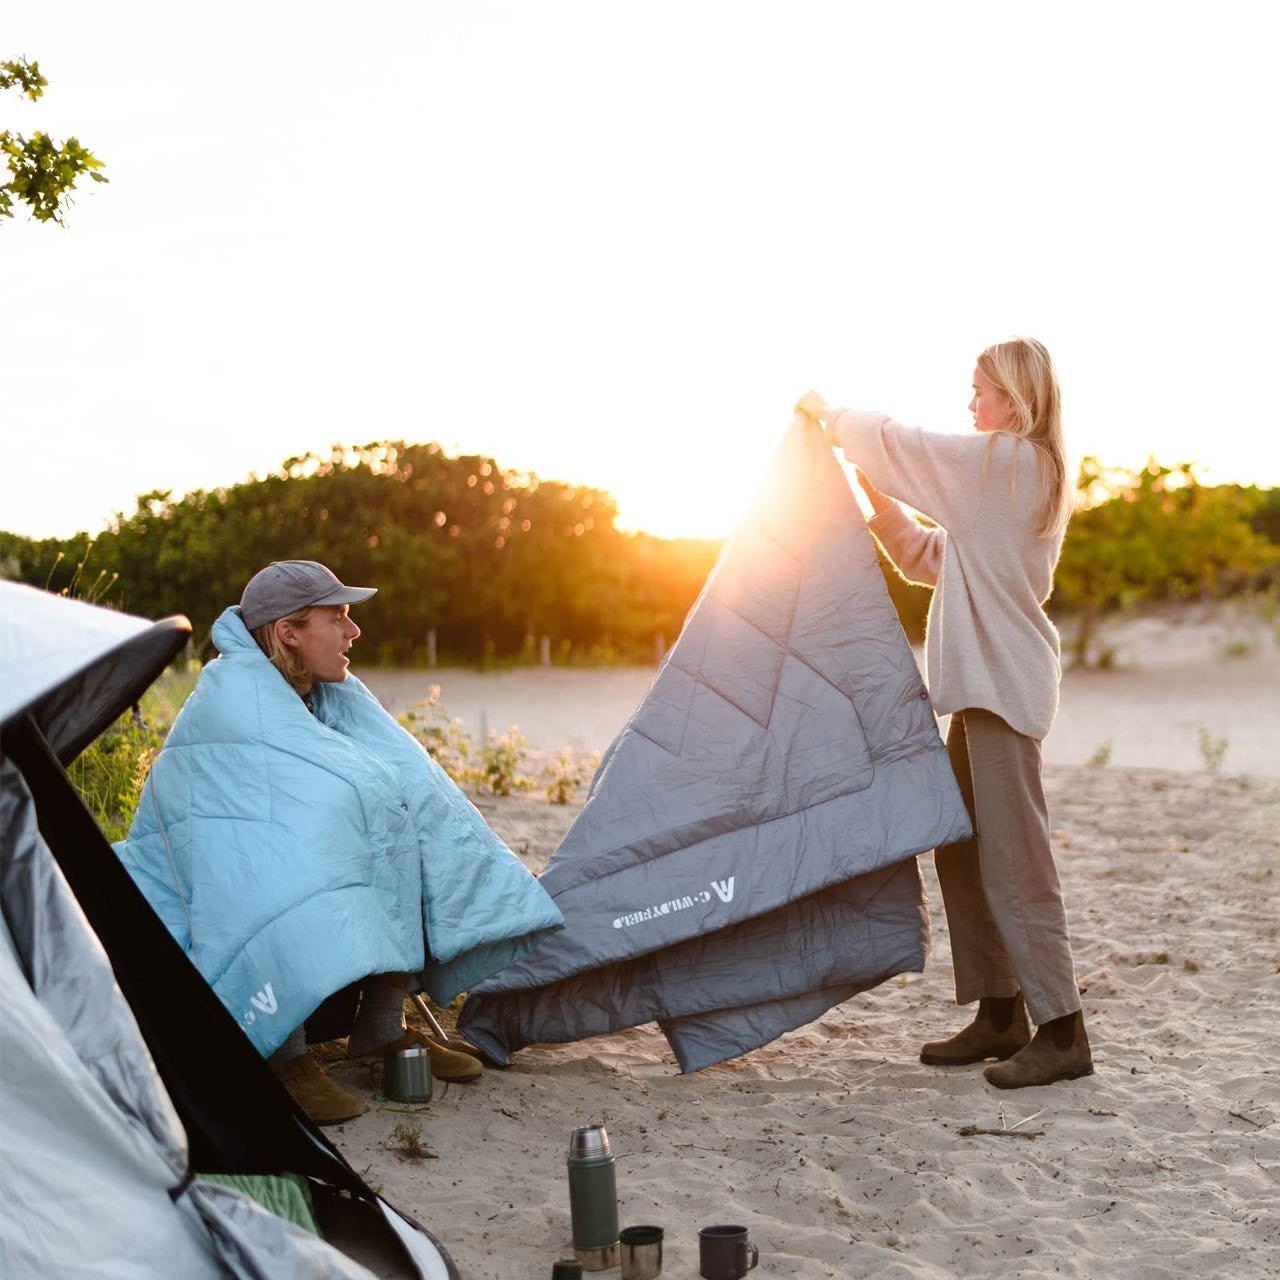 Multifunction blanket wearable camping blanketBring the comforts of home to the great outdoors with this multifunction wearable camping blanket! Made with a specifically designed fabric, this blanket offers all outdoorTOPDEALTOPDEALMultifunction blanket wearable camping blanket